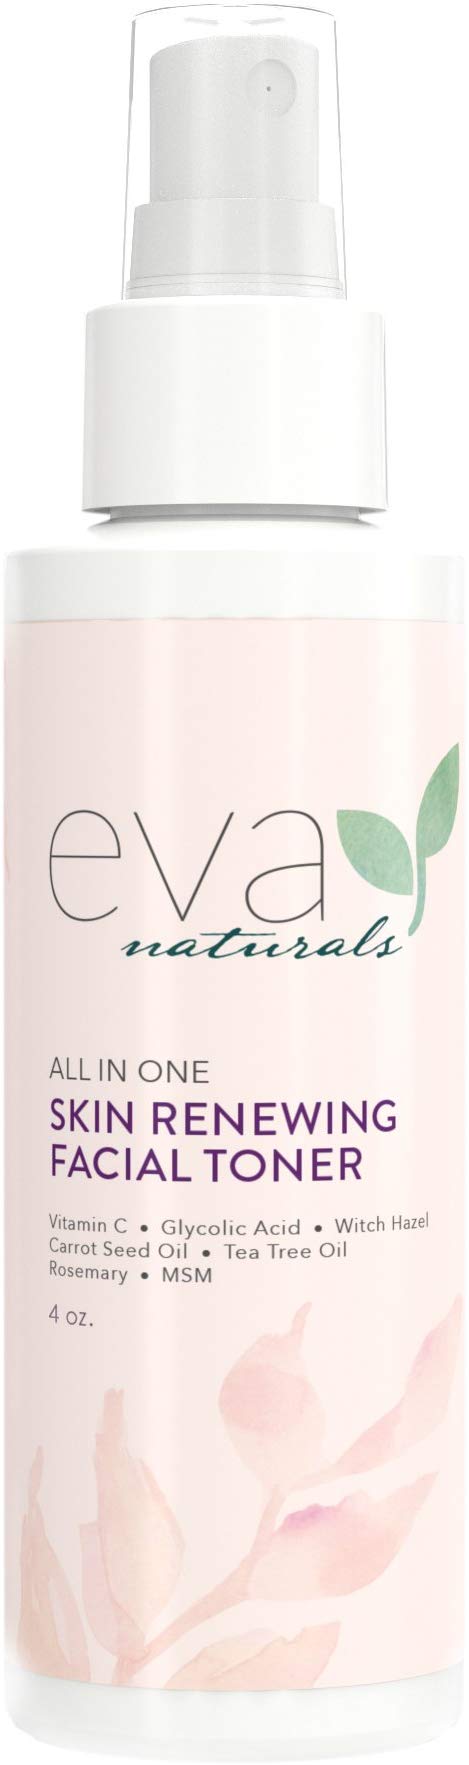 Eva Naturals All-In-One Skin Renewing Facial Toner (4 ounce) - Face Moisturizer and Natural Skin Cleanser Brightens, Restores and Helps Fight Acne - with Vitamin C, Lavender and Bee Propolis